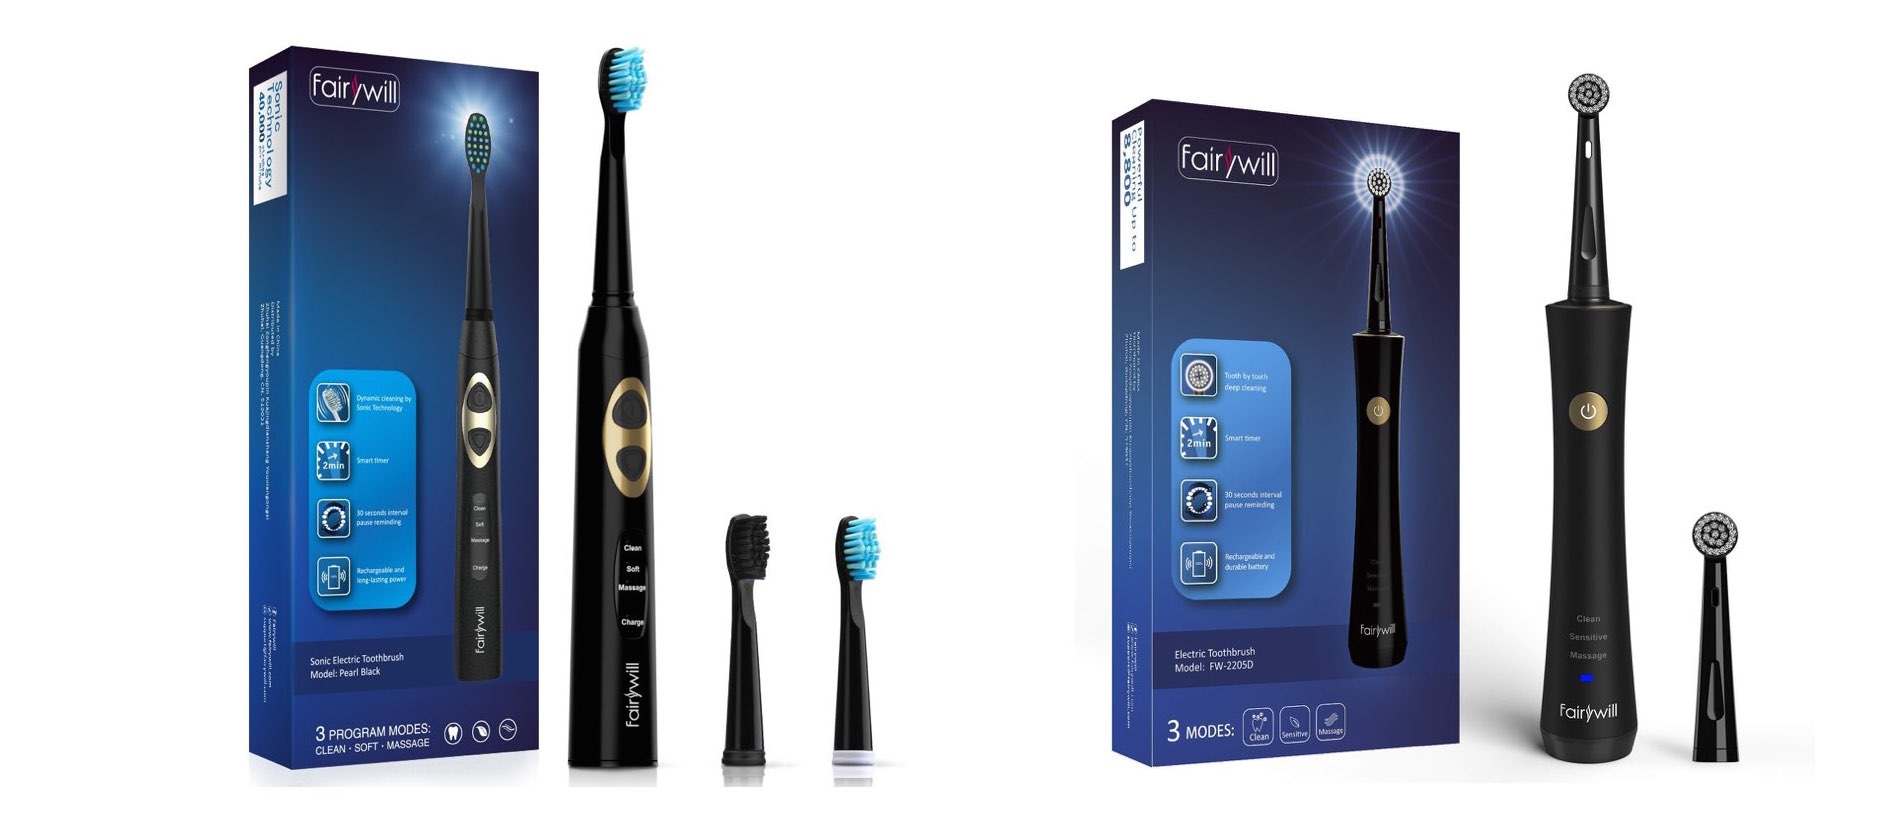 Fairywill electric toothbrush on Amazon